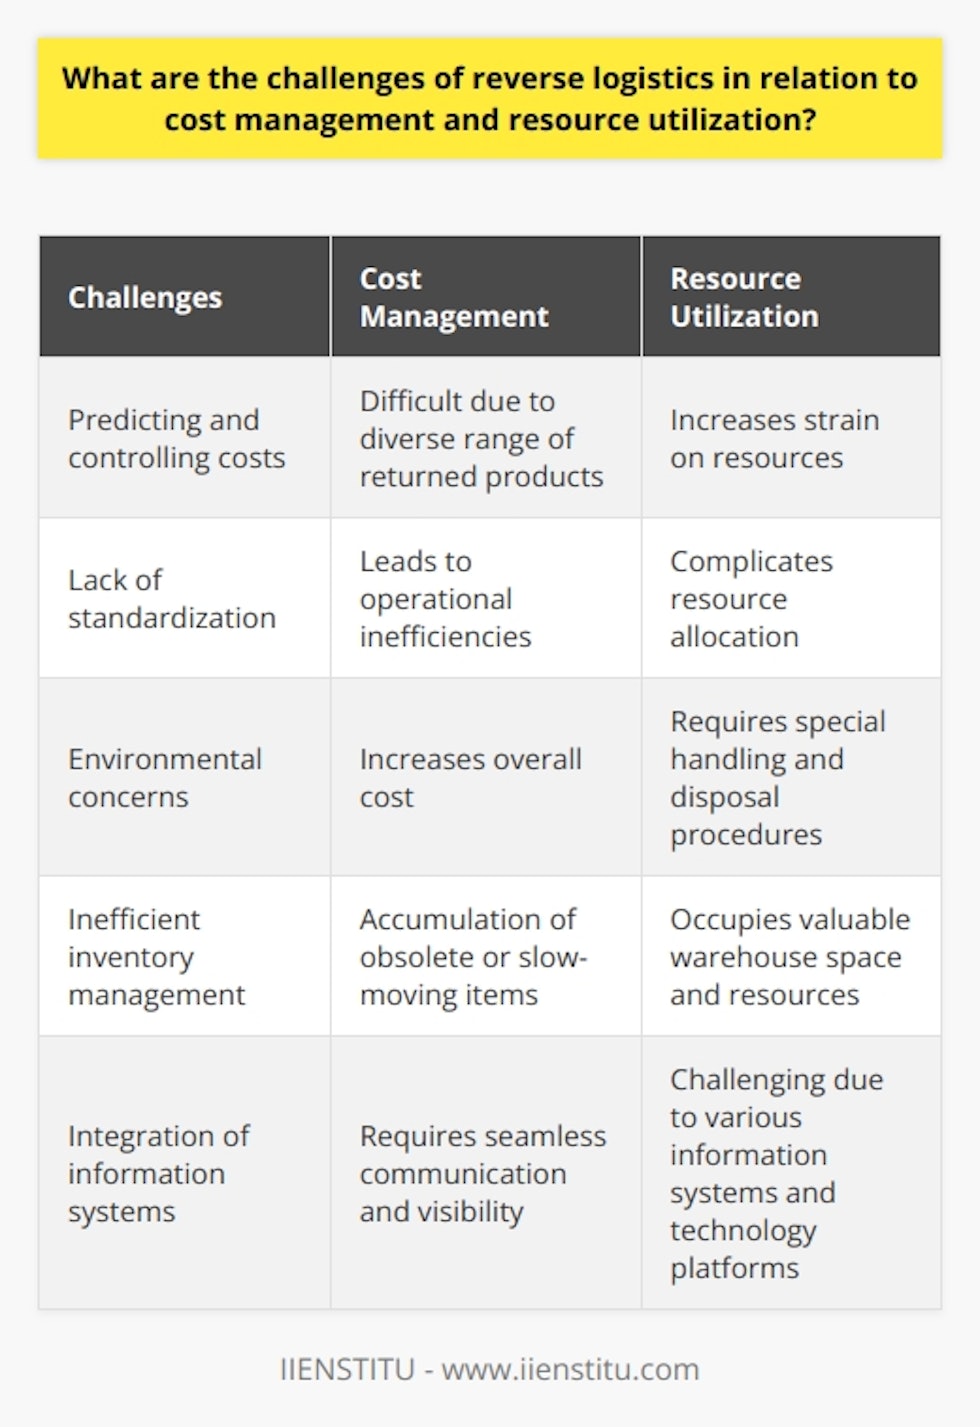 Reverse logistics, which involves the management of product returns and the associated processes, presents several challenges when it comes to cost management and resource utilization. These challenges arise due to the unique nature of reverse logistics operations and the need for efficient handling of returned products.Cost management is a crucial aspect of reverse logistics, as organizations strive to minimize expenses while maximizing the value extracted from returned products. However, predicting and controlling costs in reverse logistics can be difficult. Unlike forward logistics, where products are transported from the manufacturer to the end consumer in a predictable manner, reverse logistics deals with a diverse range of returned products. These products can vary in condition, making it challenging for organizations to accurately predict transportation, handling, and disposal costs. This unpredictability can lead to fluctuations in costs and make it harder for organizations to maintain a cost-effective reverse logistics process.Resource utilization is another challenge in reverse logistics. Managing an efficient reverse logistics system often requires dedicating extra personnel, facilities, and equipment solely to handle the returned products. This can put strain on a company's resources and increase expenses. Additionally, the process of inspecting, sorting, and disposition of returned items can be labor-intensive and time-consuming, further adding to resource utilization challenges.Lack of standardization and inconsistent processes also pose challenges to cost management and resource utilization in reverse logistics. Unlike forward logistics, where there are well-established industry guidelines and best practices, reverse logistics lacks universally applicable standards. This absence of standardization can lead to operational inefficiencies, such as increased costs and improper allocation of resources. Organizations must navigate through varying processes and guidelines, which can complicate cost management and resource utilization in reverse logistics.Environmental concerns add another layer of complexity to reverse logistics. Dealing with e-waste or hazardous materials in returned products requires special handling and disposal procedures. Adhering to environmentally responsible practices can increase the overall cost of reverse logistics while also demanding additional resources for safe and compliant disposal.Inefficient inventory management of returned products further contributes to the challenges faced in cost management and resource utilization in reverse logistics. Poorly managed returns can result in an accumulation of obsolete or slow-moving items in inventory, occupying valuable warehouse space and resources. This situation can increase the overall cost of inventory management and negatively impact a company's bottom line.Integration of information systems is also a significant challenge in managing costs and resource utilization in reverse logistics. Efficient coordination between various stakeholders, such as suppliers, carriers, and customers, is crucial for effective cost control and resource allocation. However, establishing seamless communication and visibility among these stakeholders can be challenging, as it requires the integration of various information systems and technology platforms.In conclusion, the challenges of reverse logistics in relation to cost management and resource utilization include predicting and controlling costs, additional strain on resources, lack of standardization, environmental concerns, inefficient inventory management, and the need for integrating information systems. Overcoming these challenges is essential for organizations to achieve an efficient and cost-effective reverse logistics process.